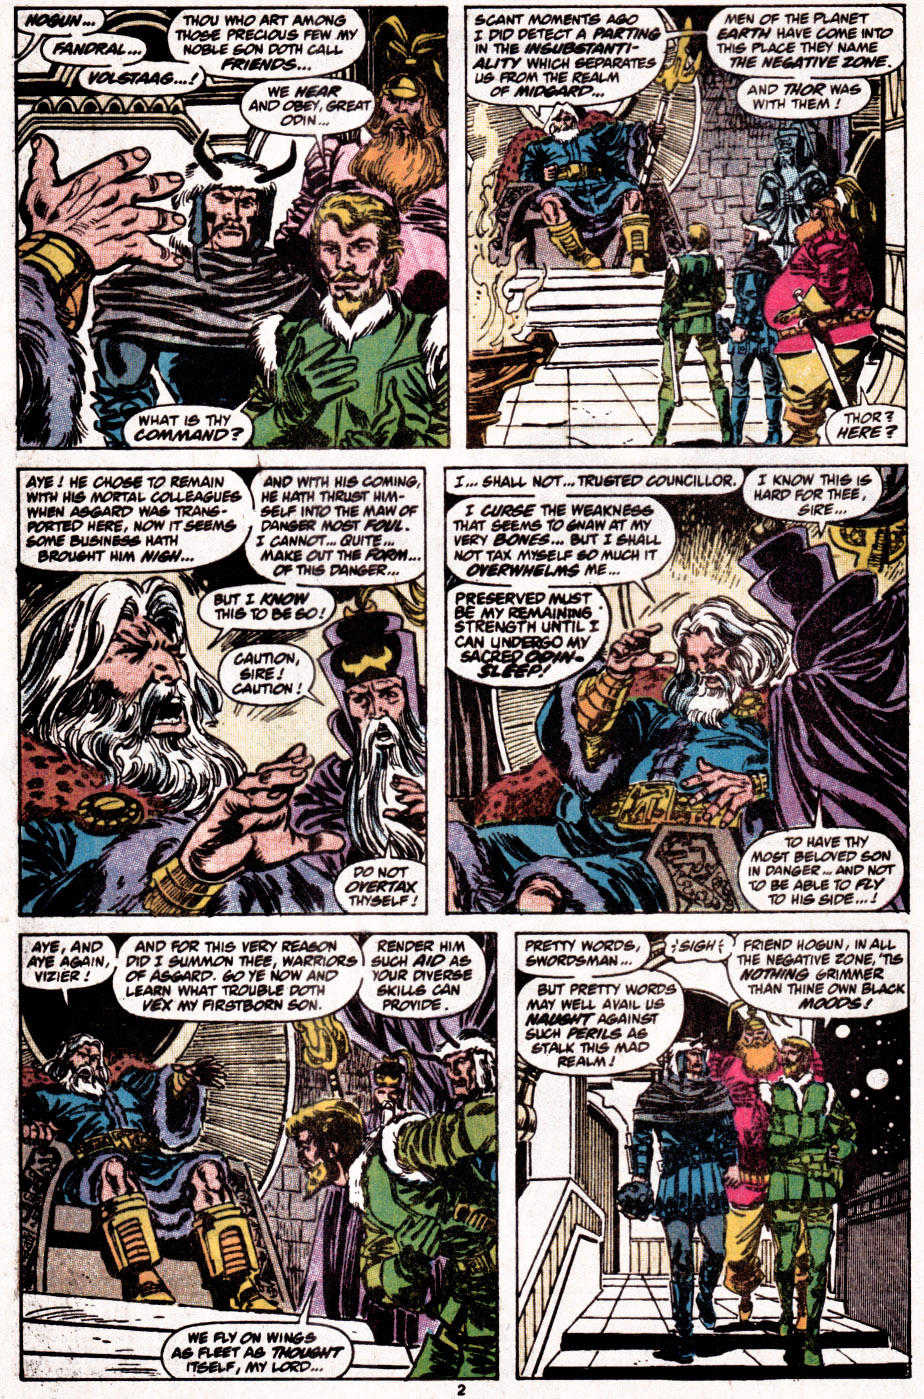 The Avengers (1963) 310 Page 2